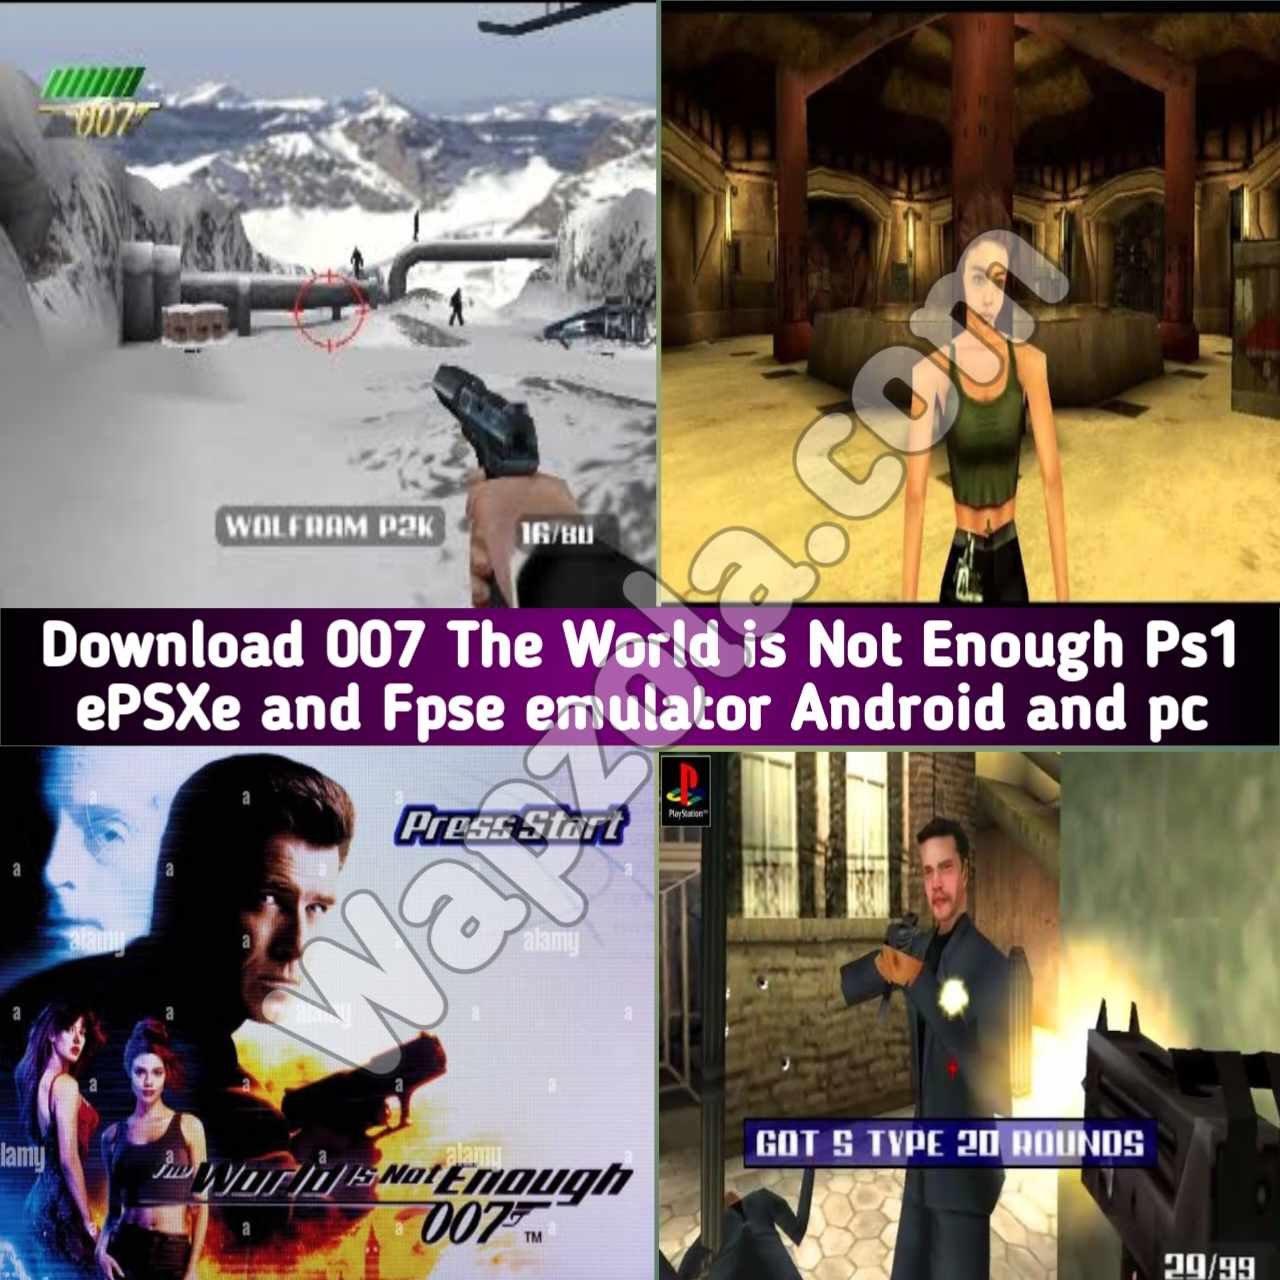 You are currently viewing [Download] 007: The World is Not Enough ROM (ISO) ePSXe and Fpse emulator (379MB size) highly compressed – Sony Playstation / PSX / PS1 APK BIN/CUE play on Android and pc